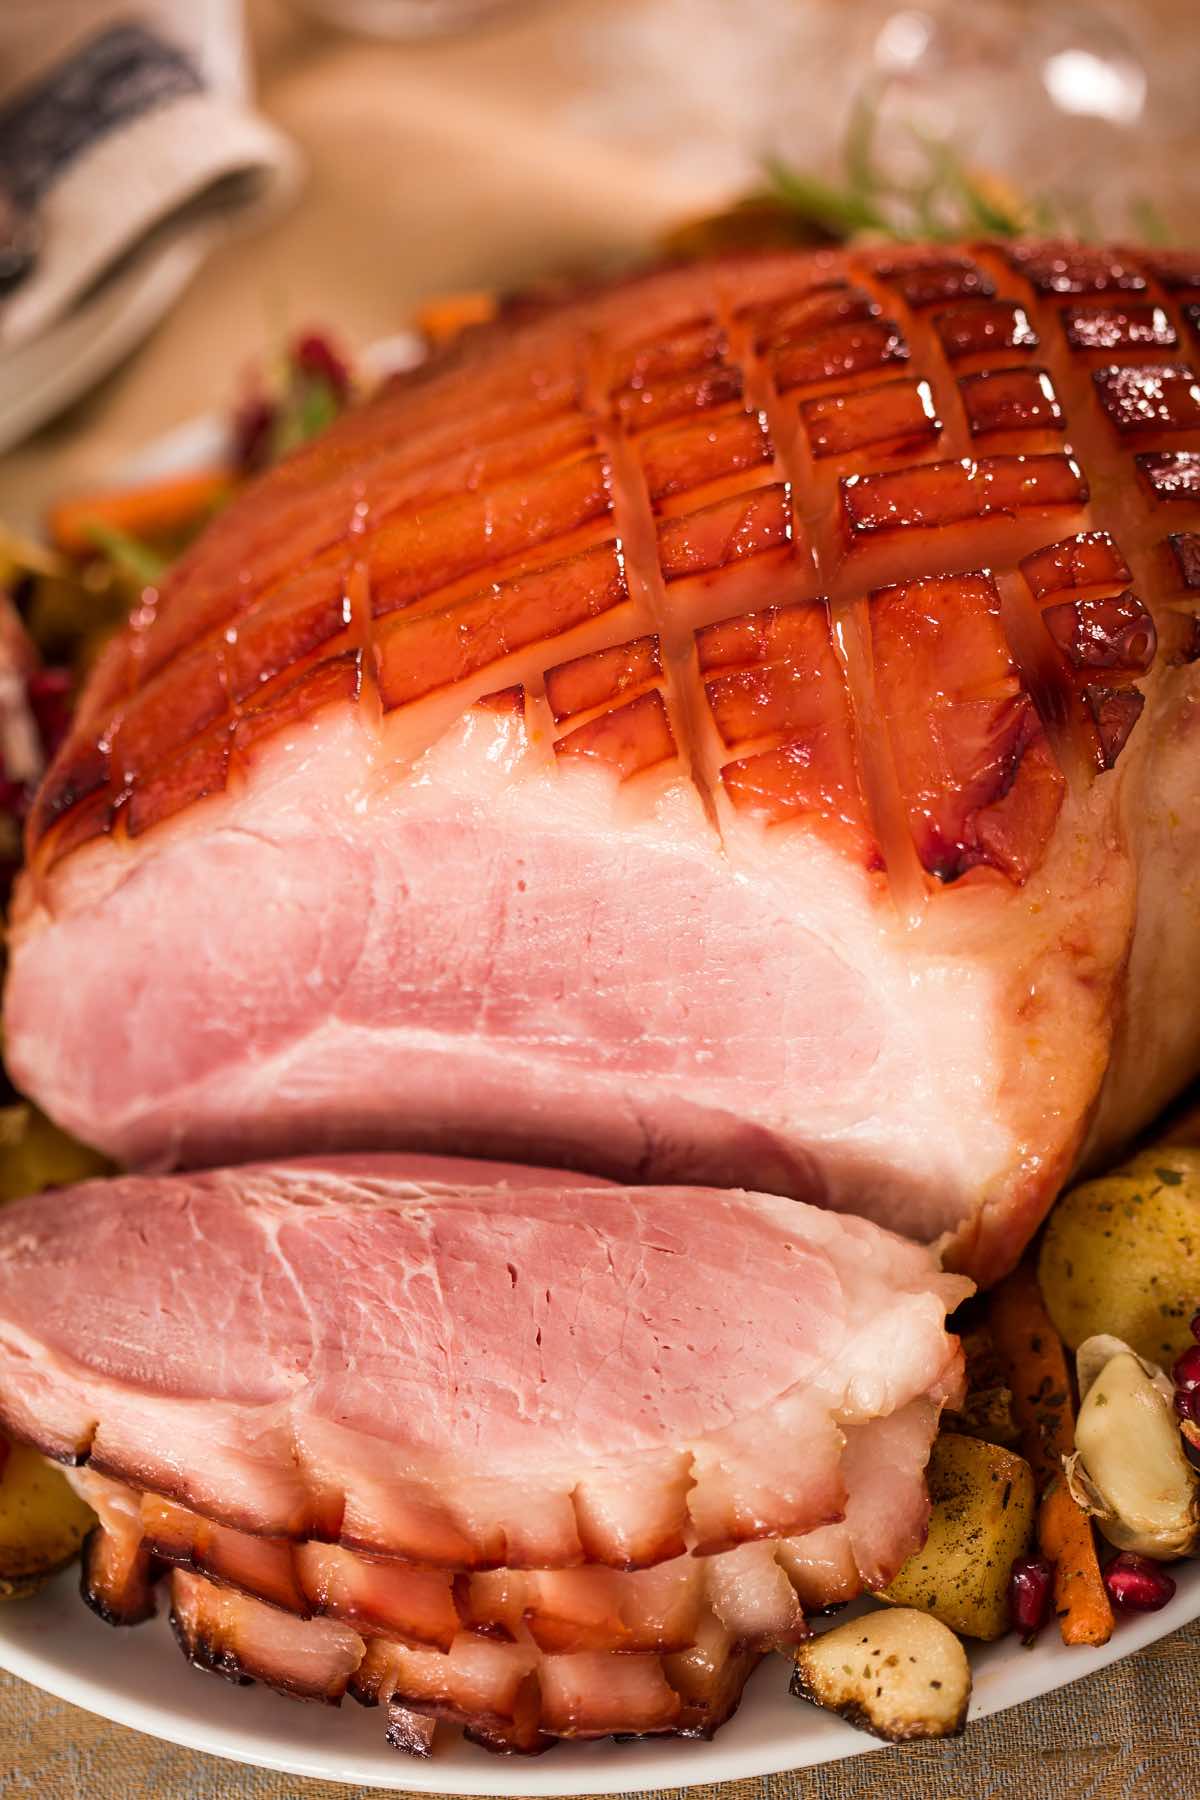 Ham isn't just for specific holidays or occasions anymore. You can easily enjoy it any night of the week! With the proper side dishes of course! Below you will find 16 Easy Side Dishes For Ham, from potatoes to veggies, salad, pasta, and much more.